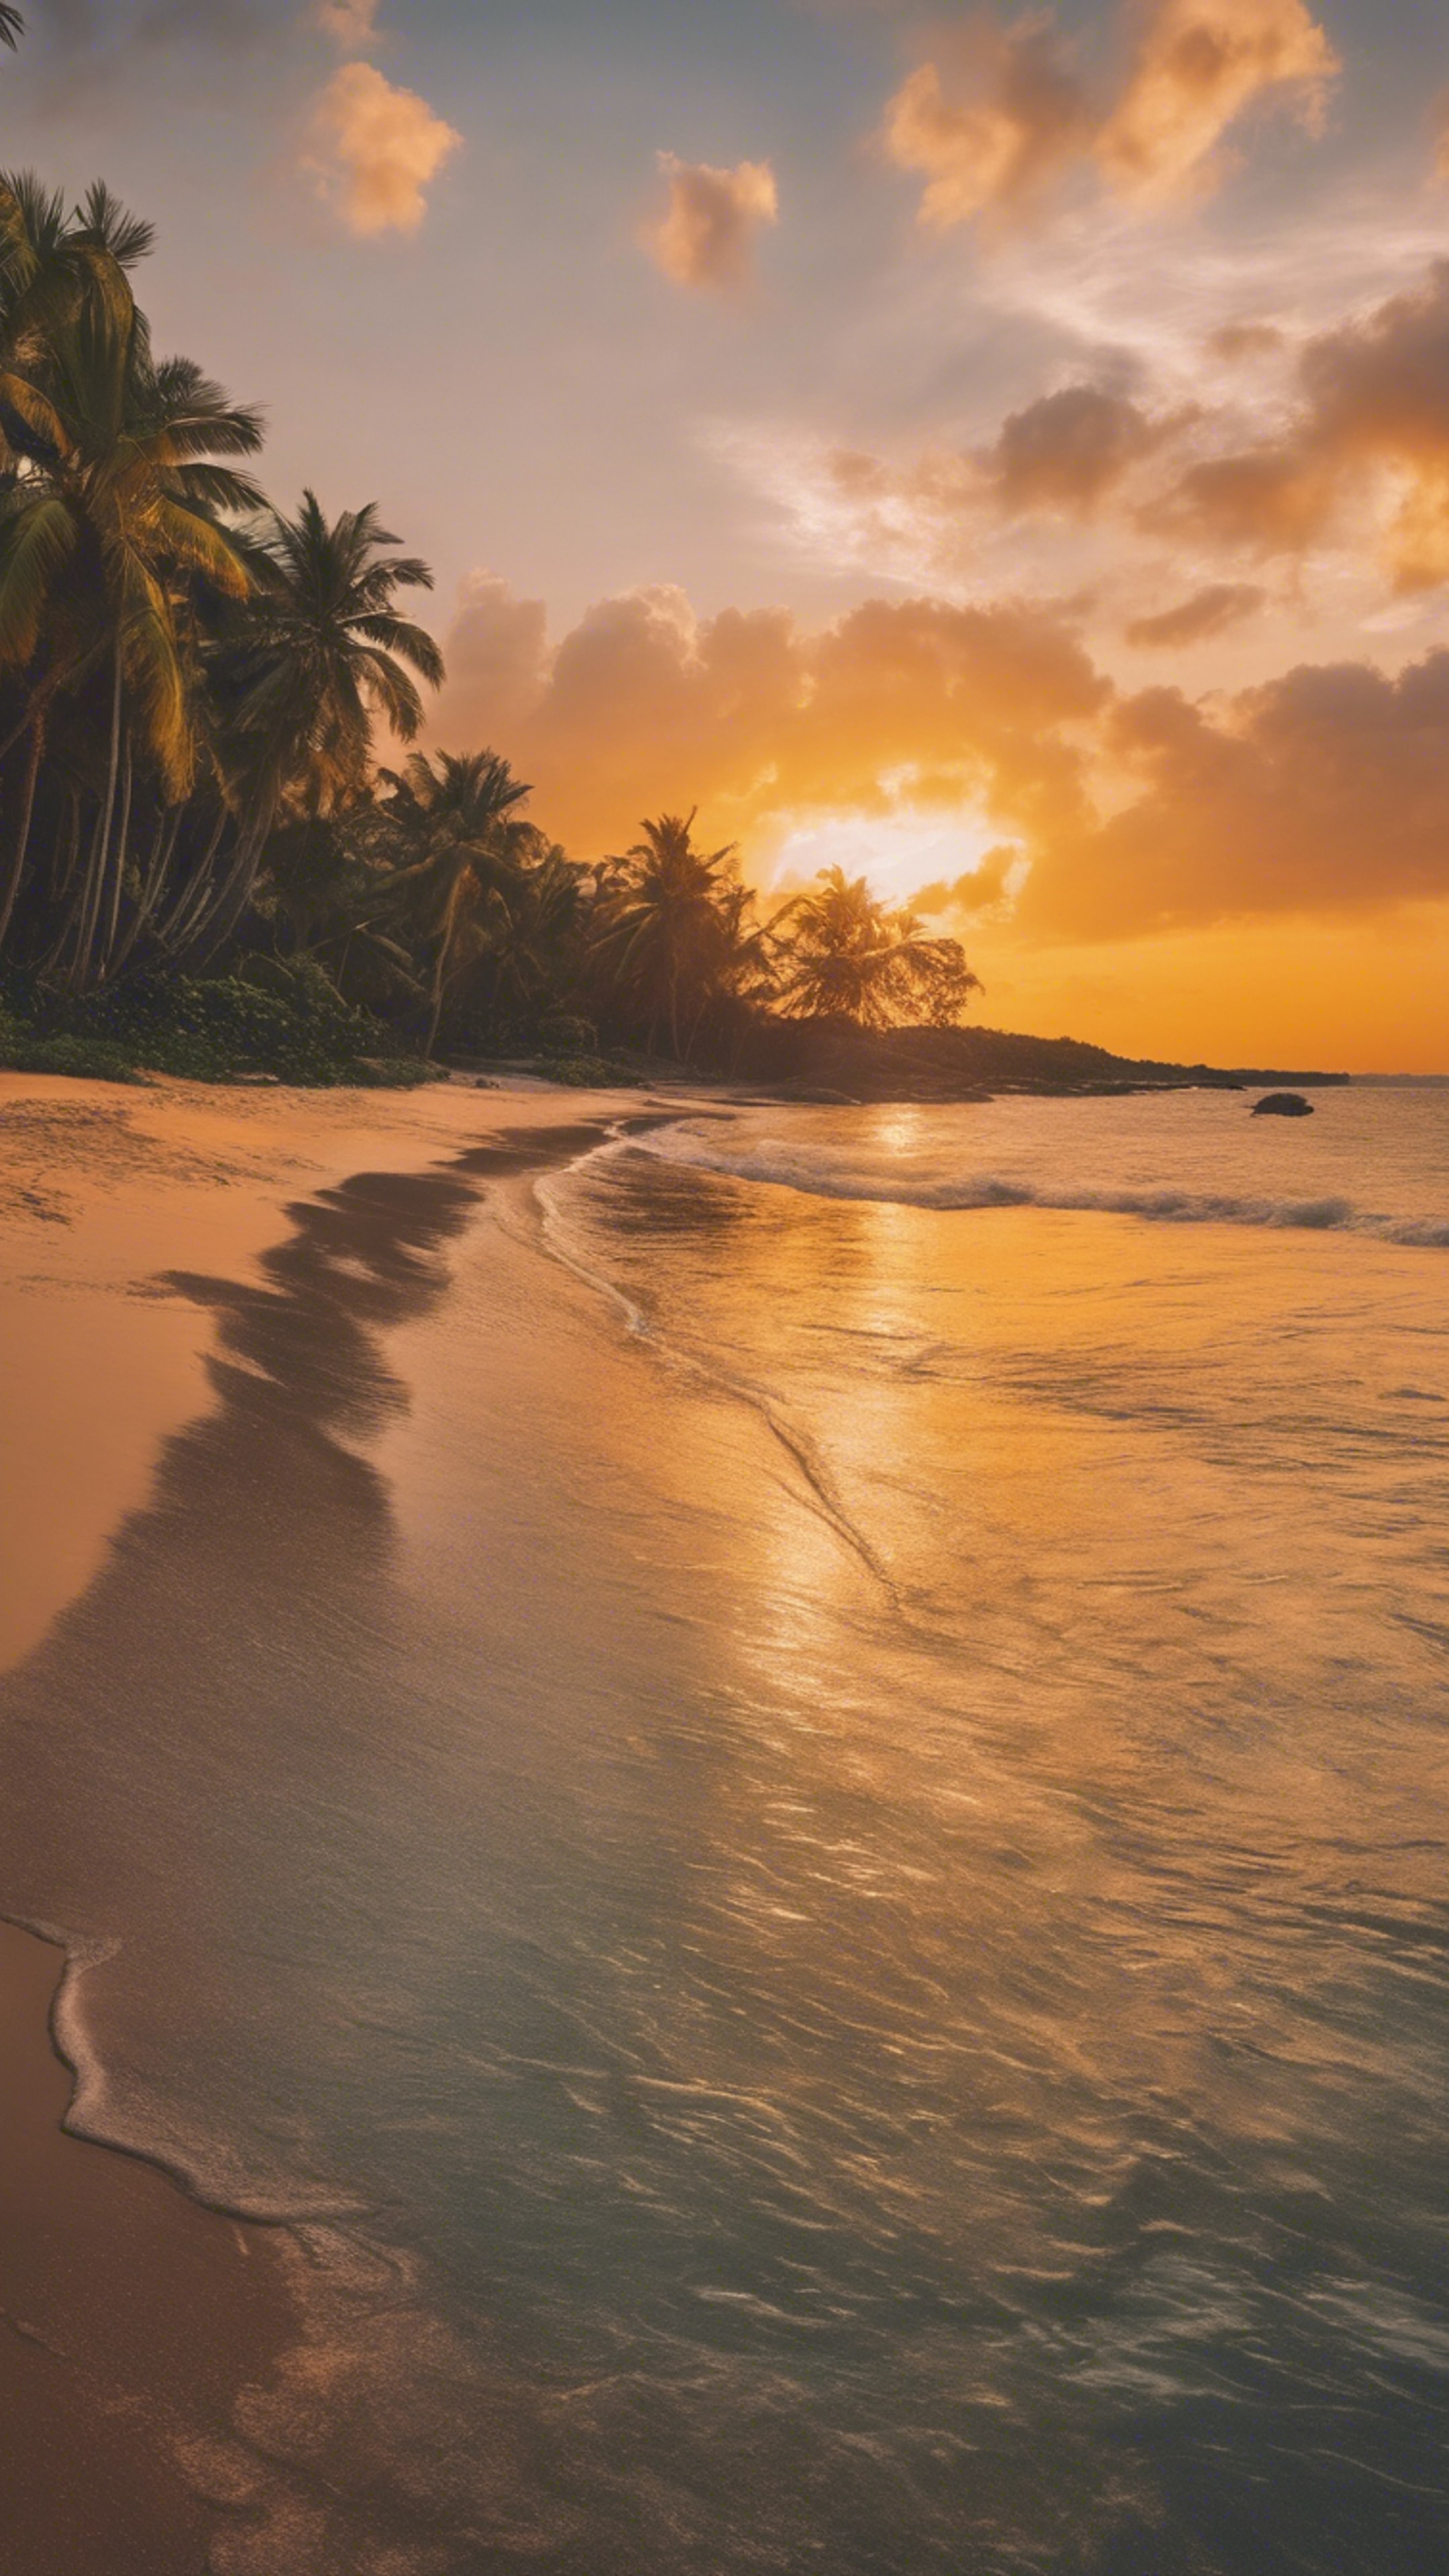 A tropical beach at sunset with hues of orange and yellow gently reflecting on the clear water. Fondo de pantalla[f1cd0a05f1594f21a6bf]